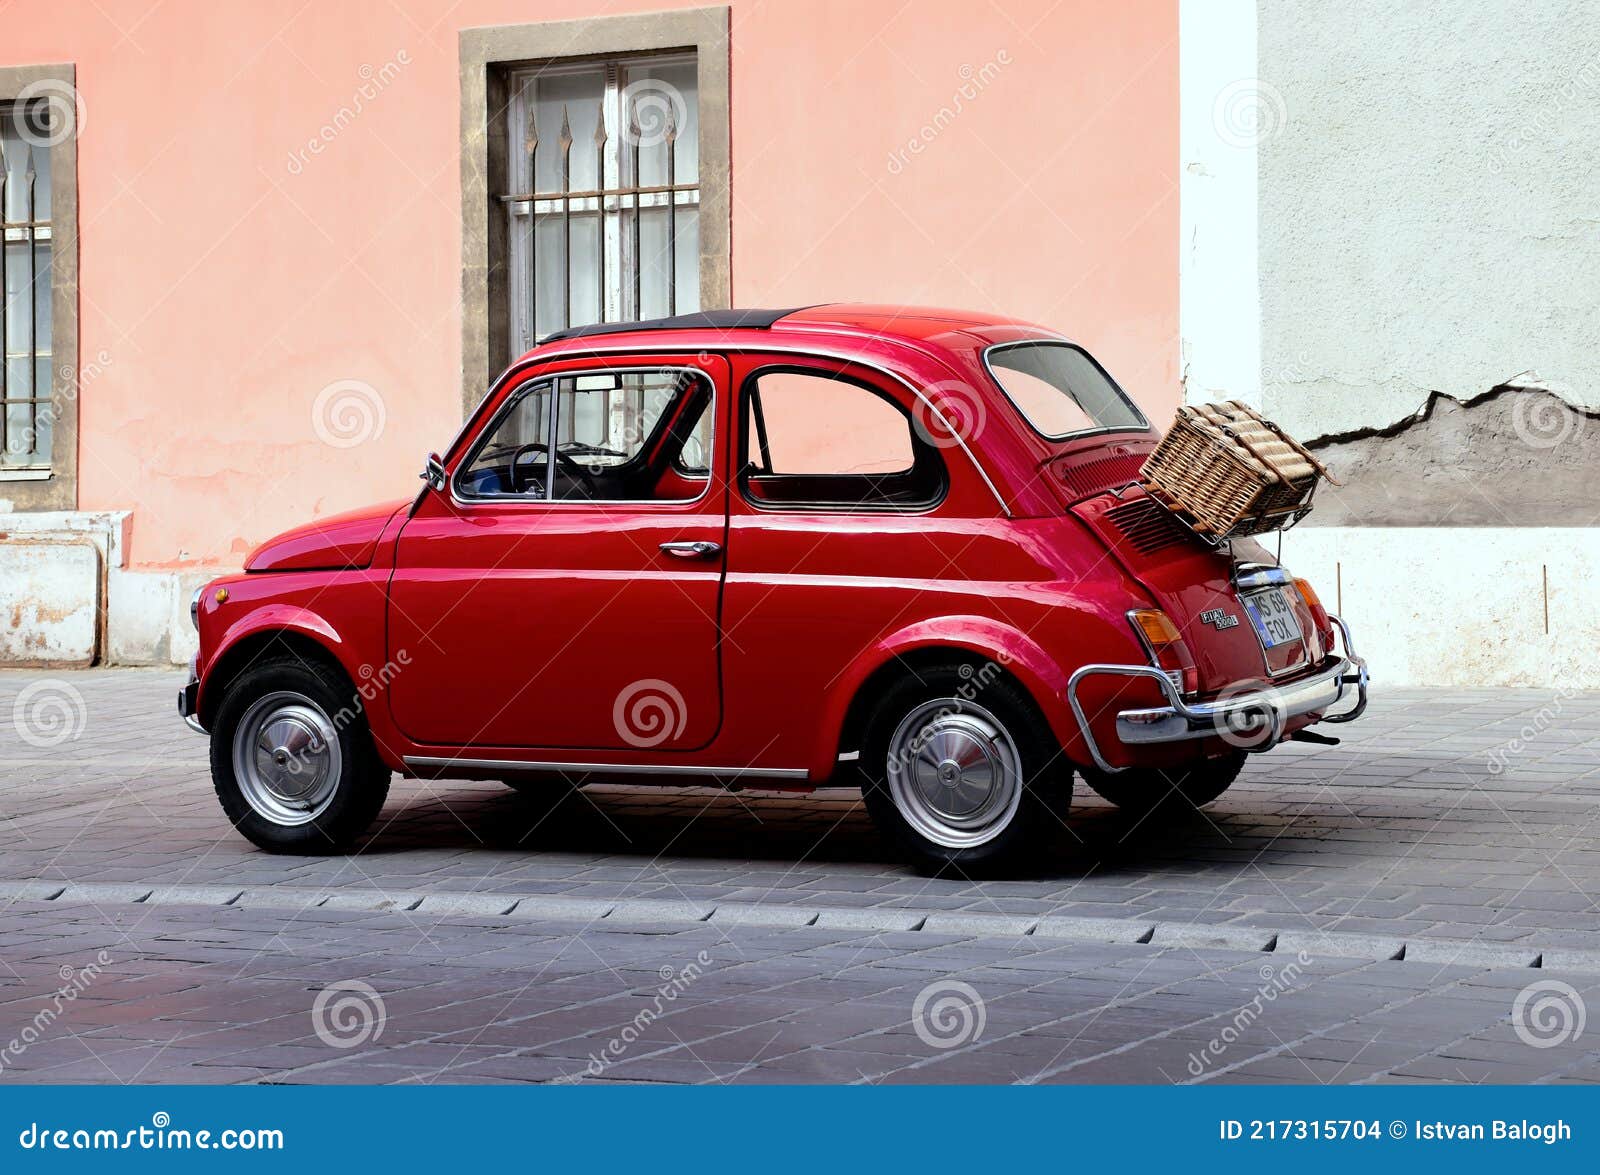 Vintage Red FIAT 500 Small Car in Side View. Grunge Stucco Elevation  Background Editorial Stock Image - Image of atmosphere, city: 217315704